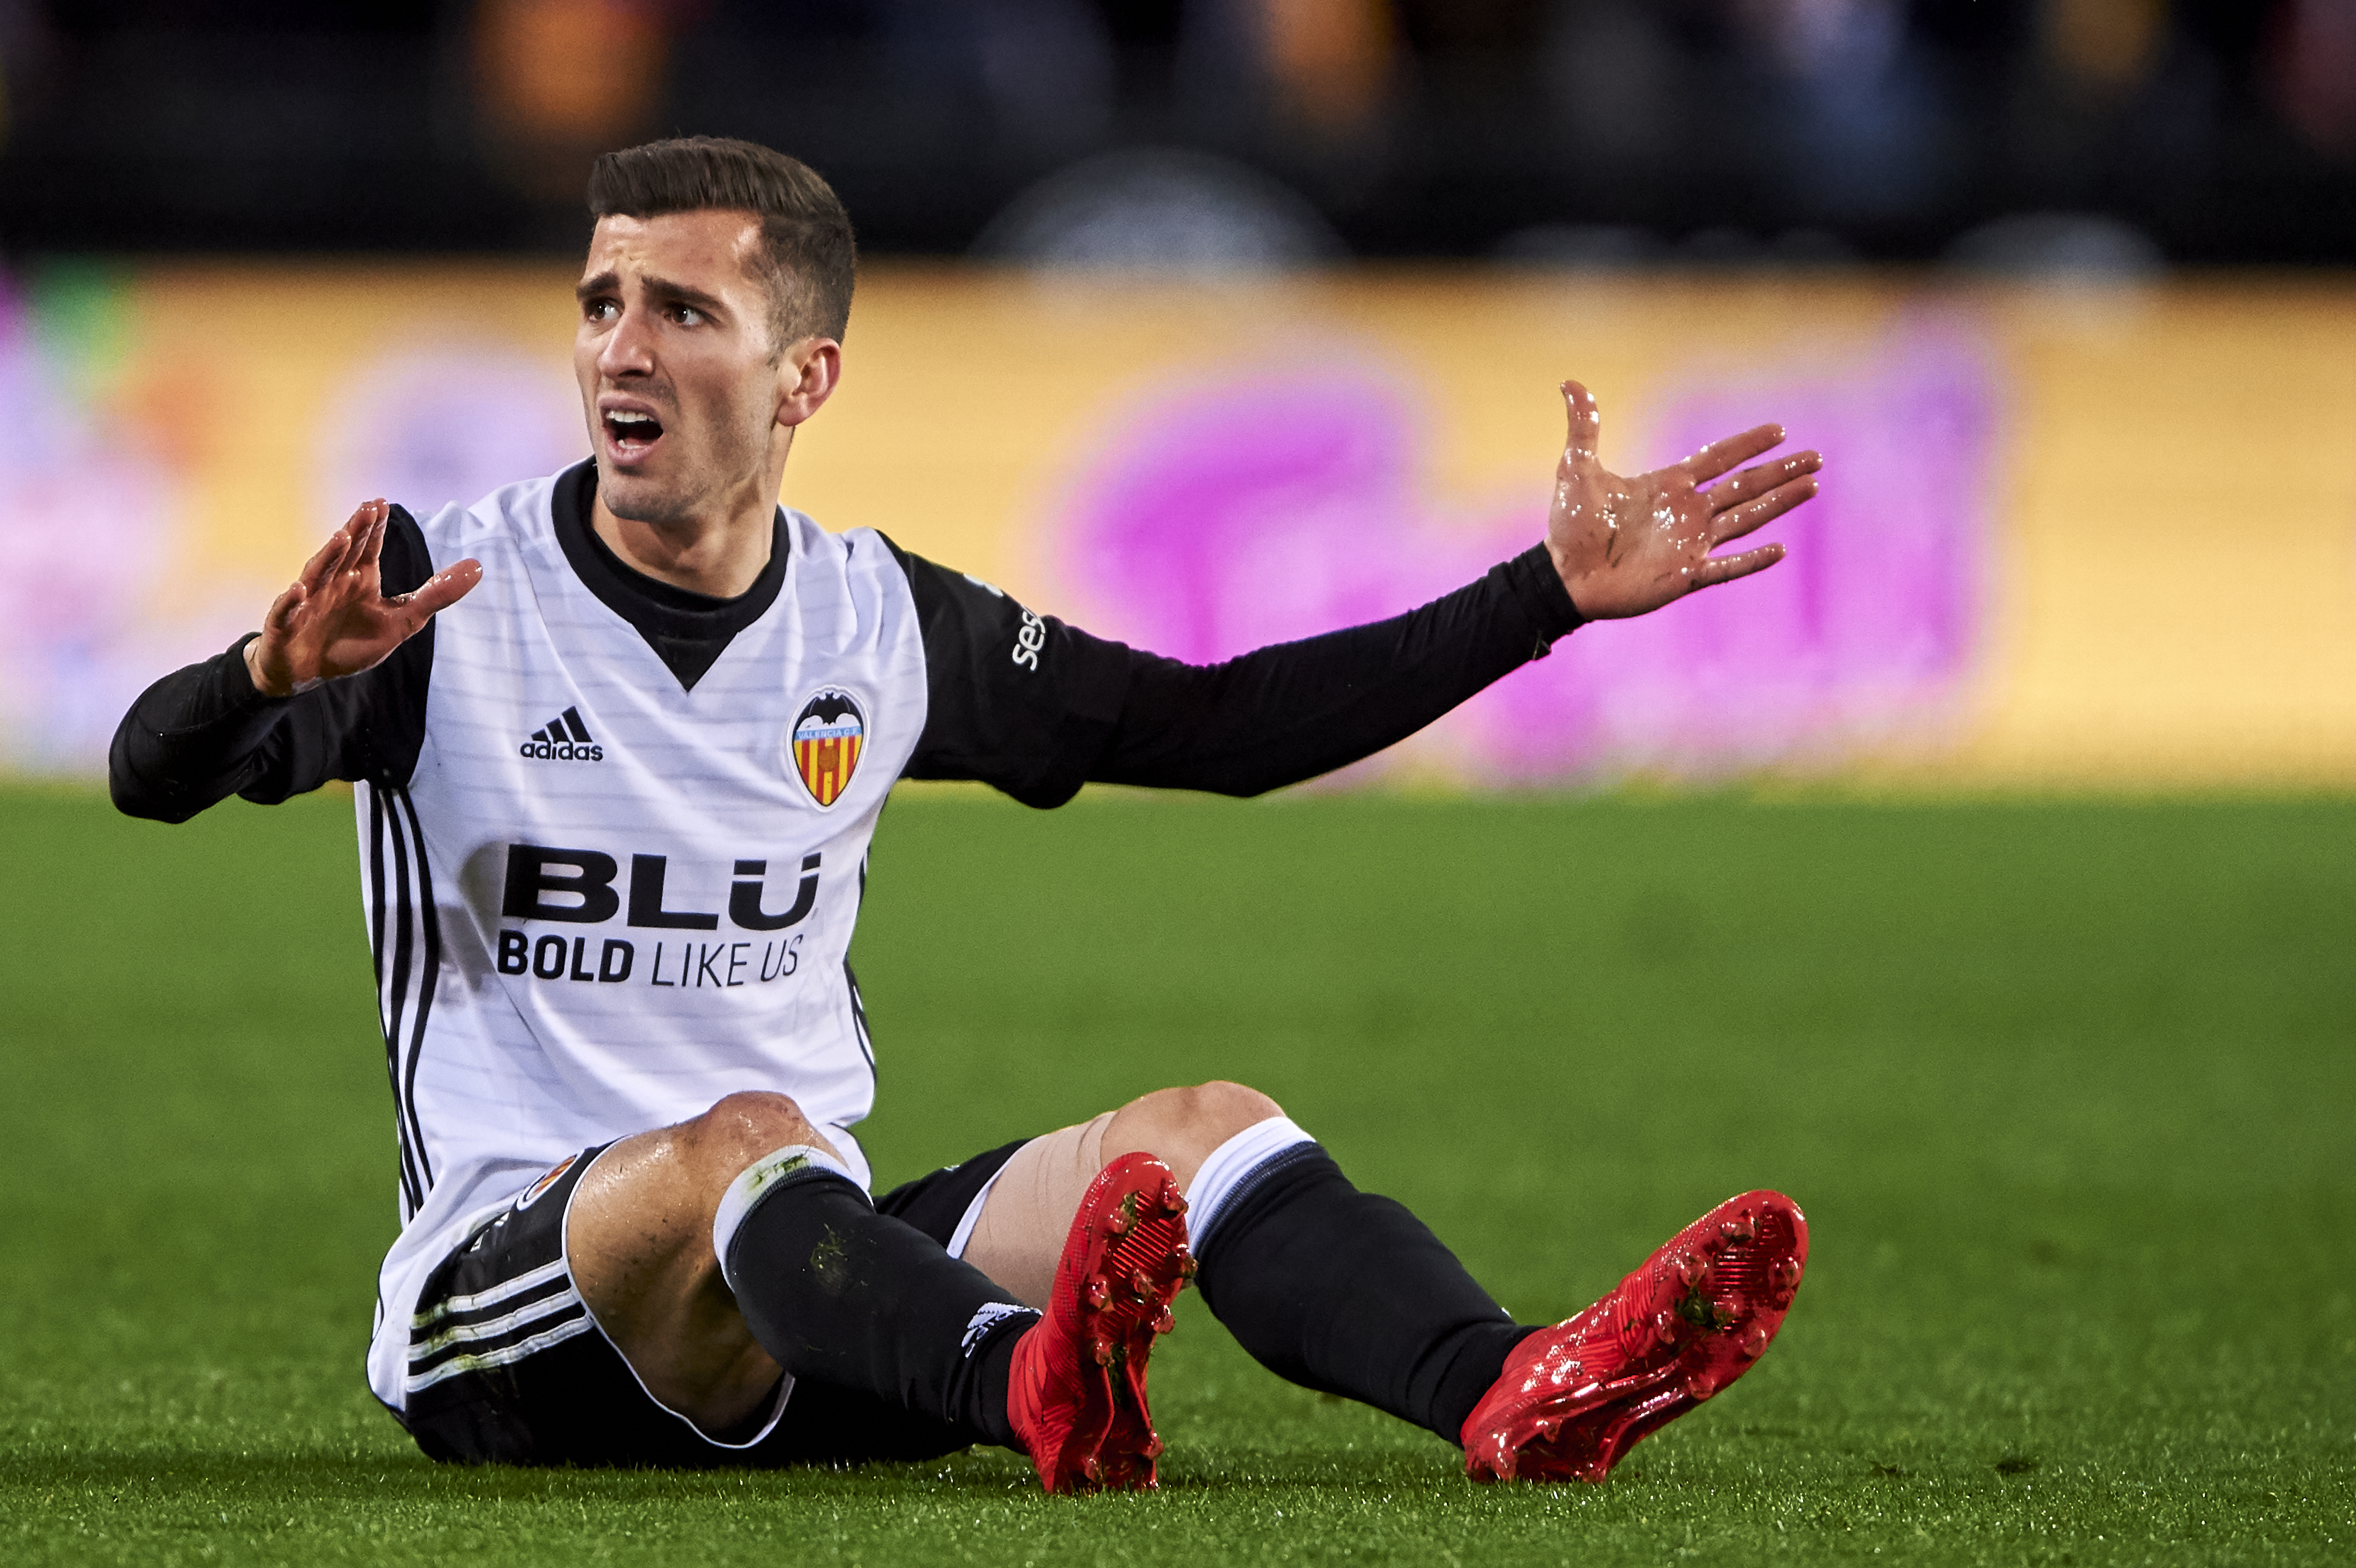 VALENCIA, SPAIN - FEBRUARY 08:  Jose Luis Gaya of Valencia CF reacts during the Copa de Rey semi-final second leg match between Valencia and Barcelona on February 8, 2018 in Valencia, Spain.  (Photo by Manuel Queimadelos Alonso/Getty Images)